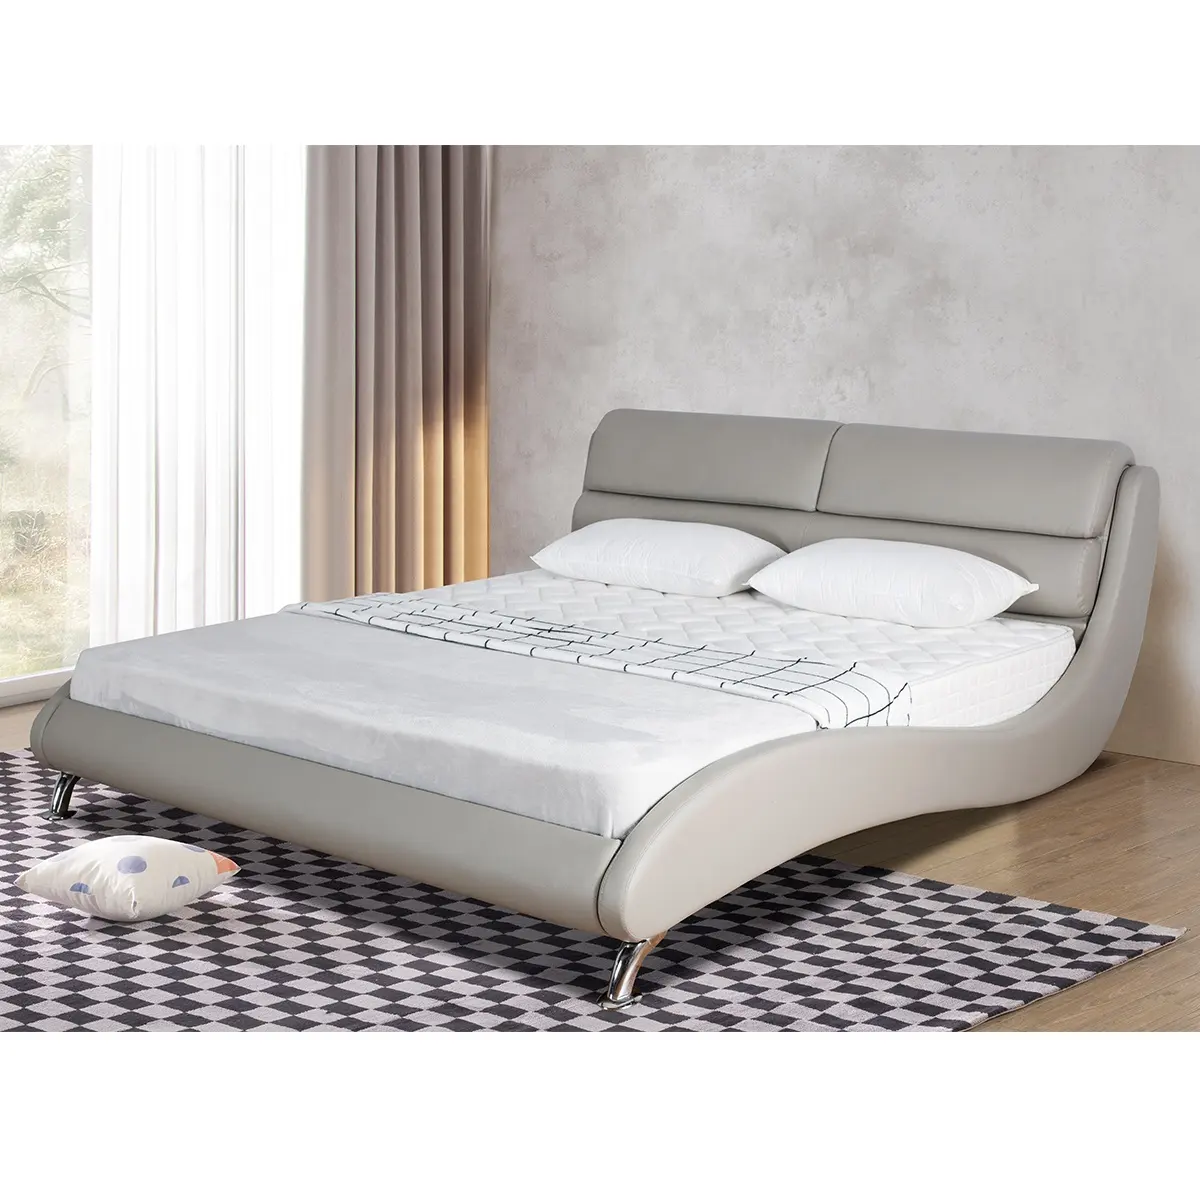 Hot sell modern new design elegant appearance single bed for sale cheap grey leather Bed